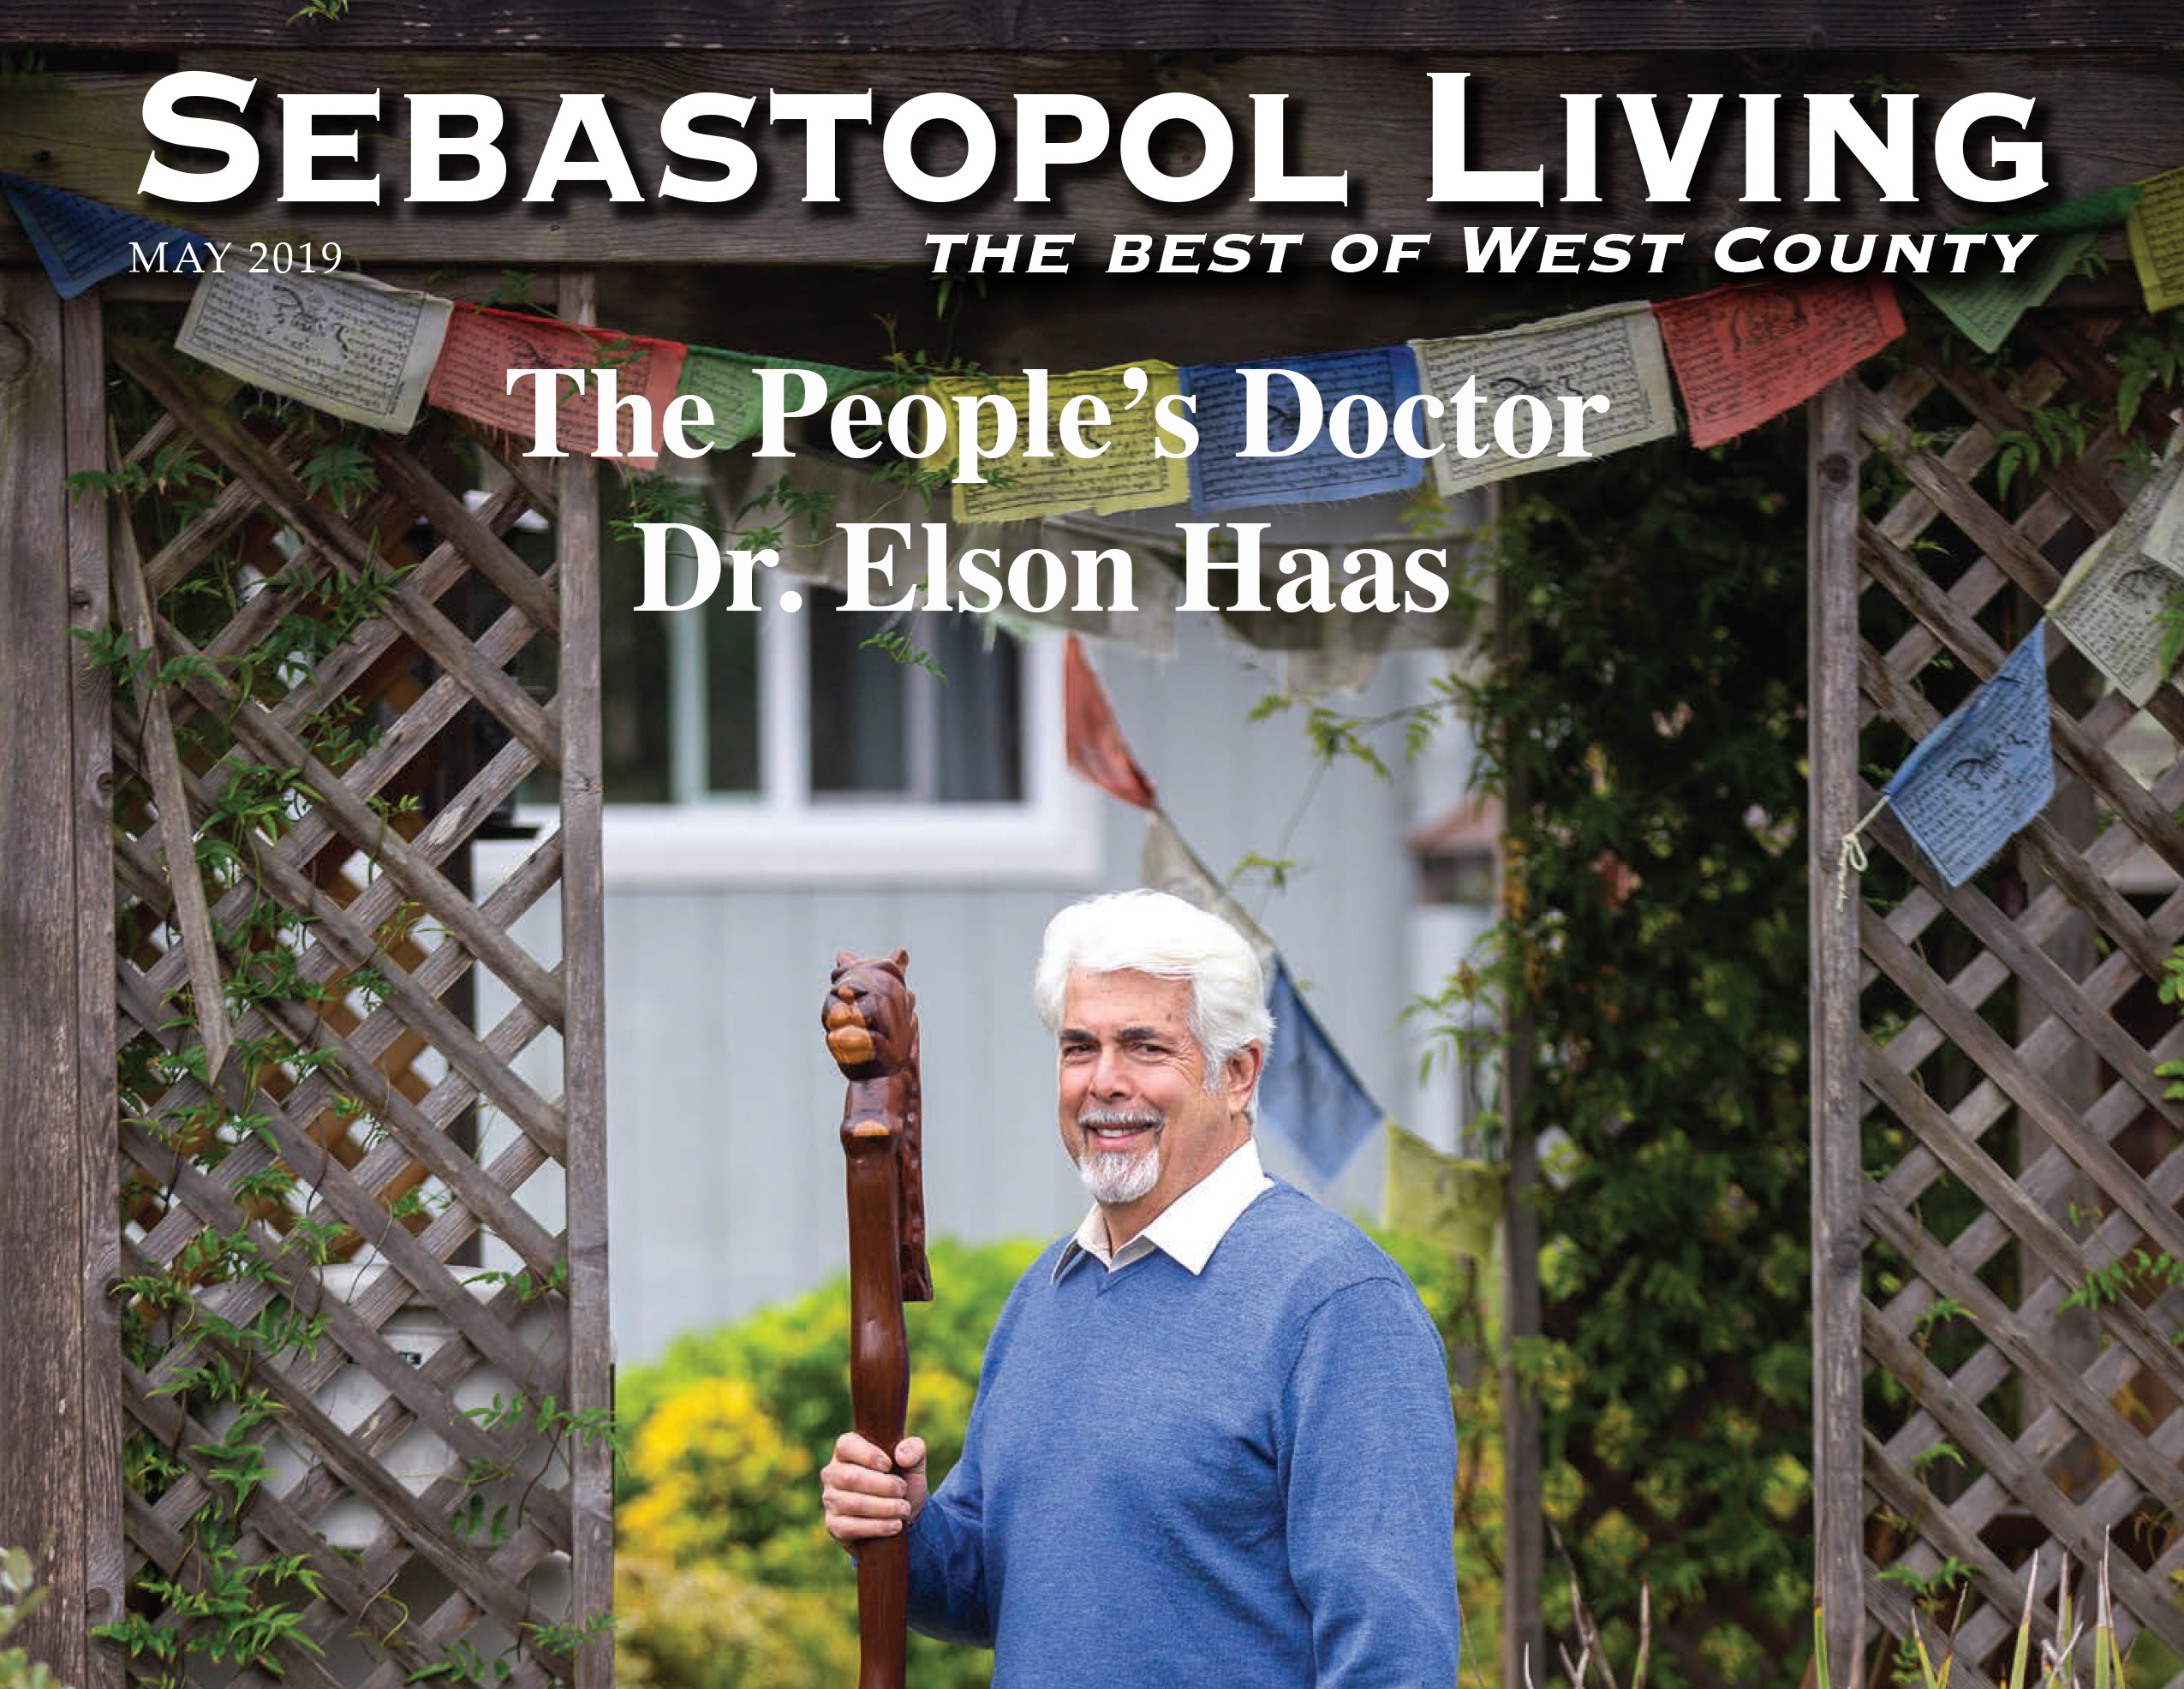 Dr. Haas on the cover of Sebastopol Living magazine May 2019